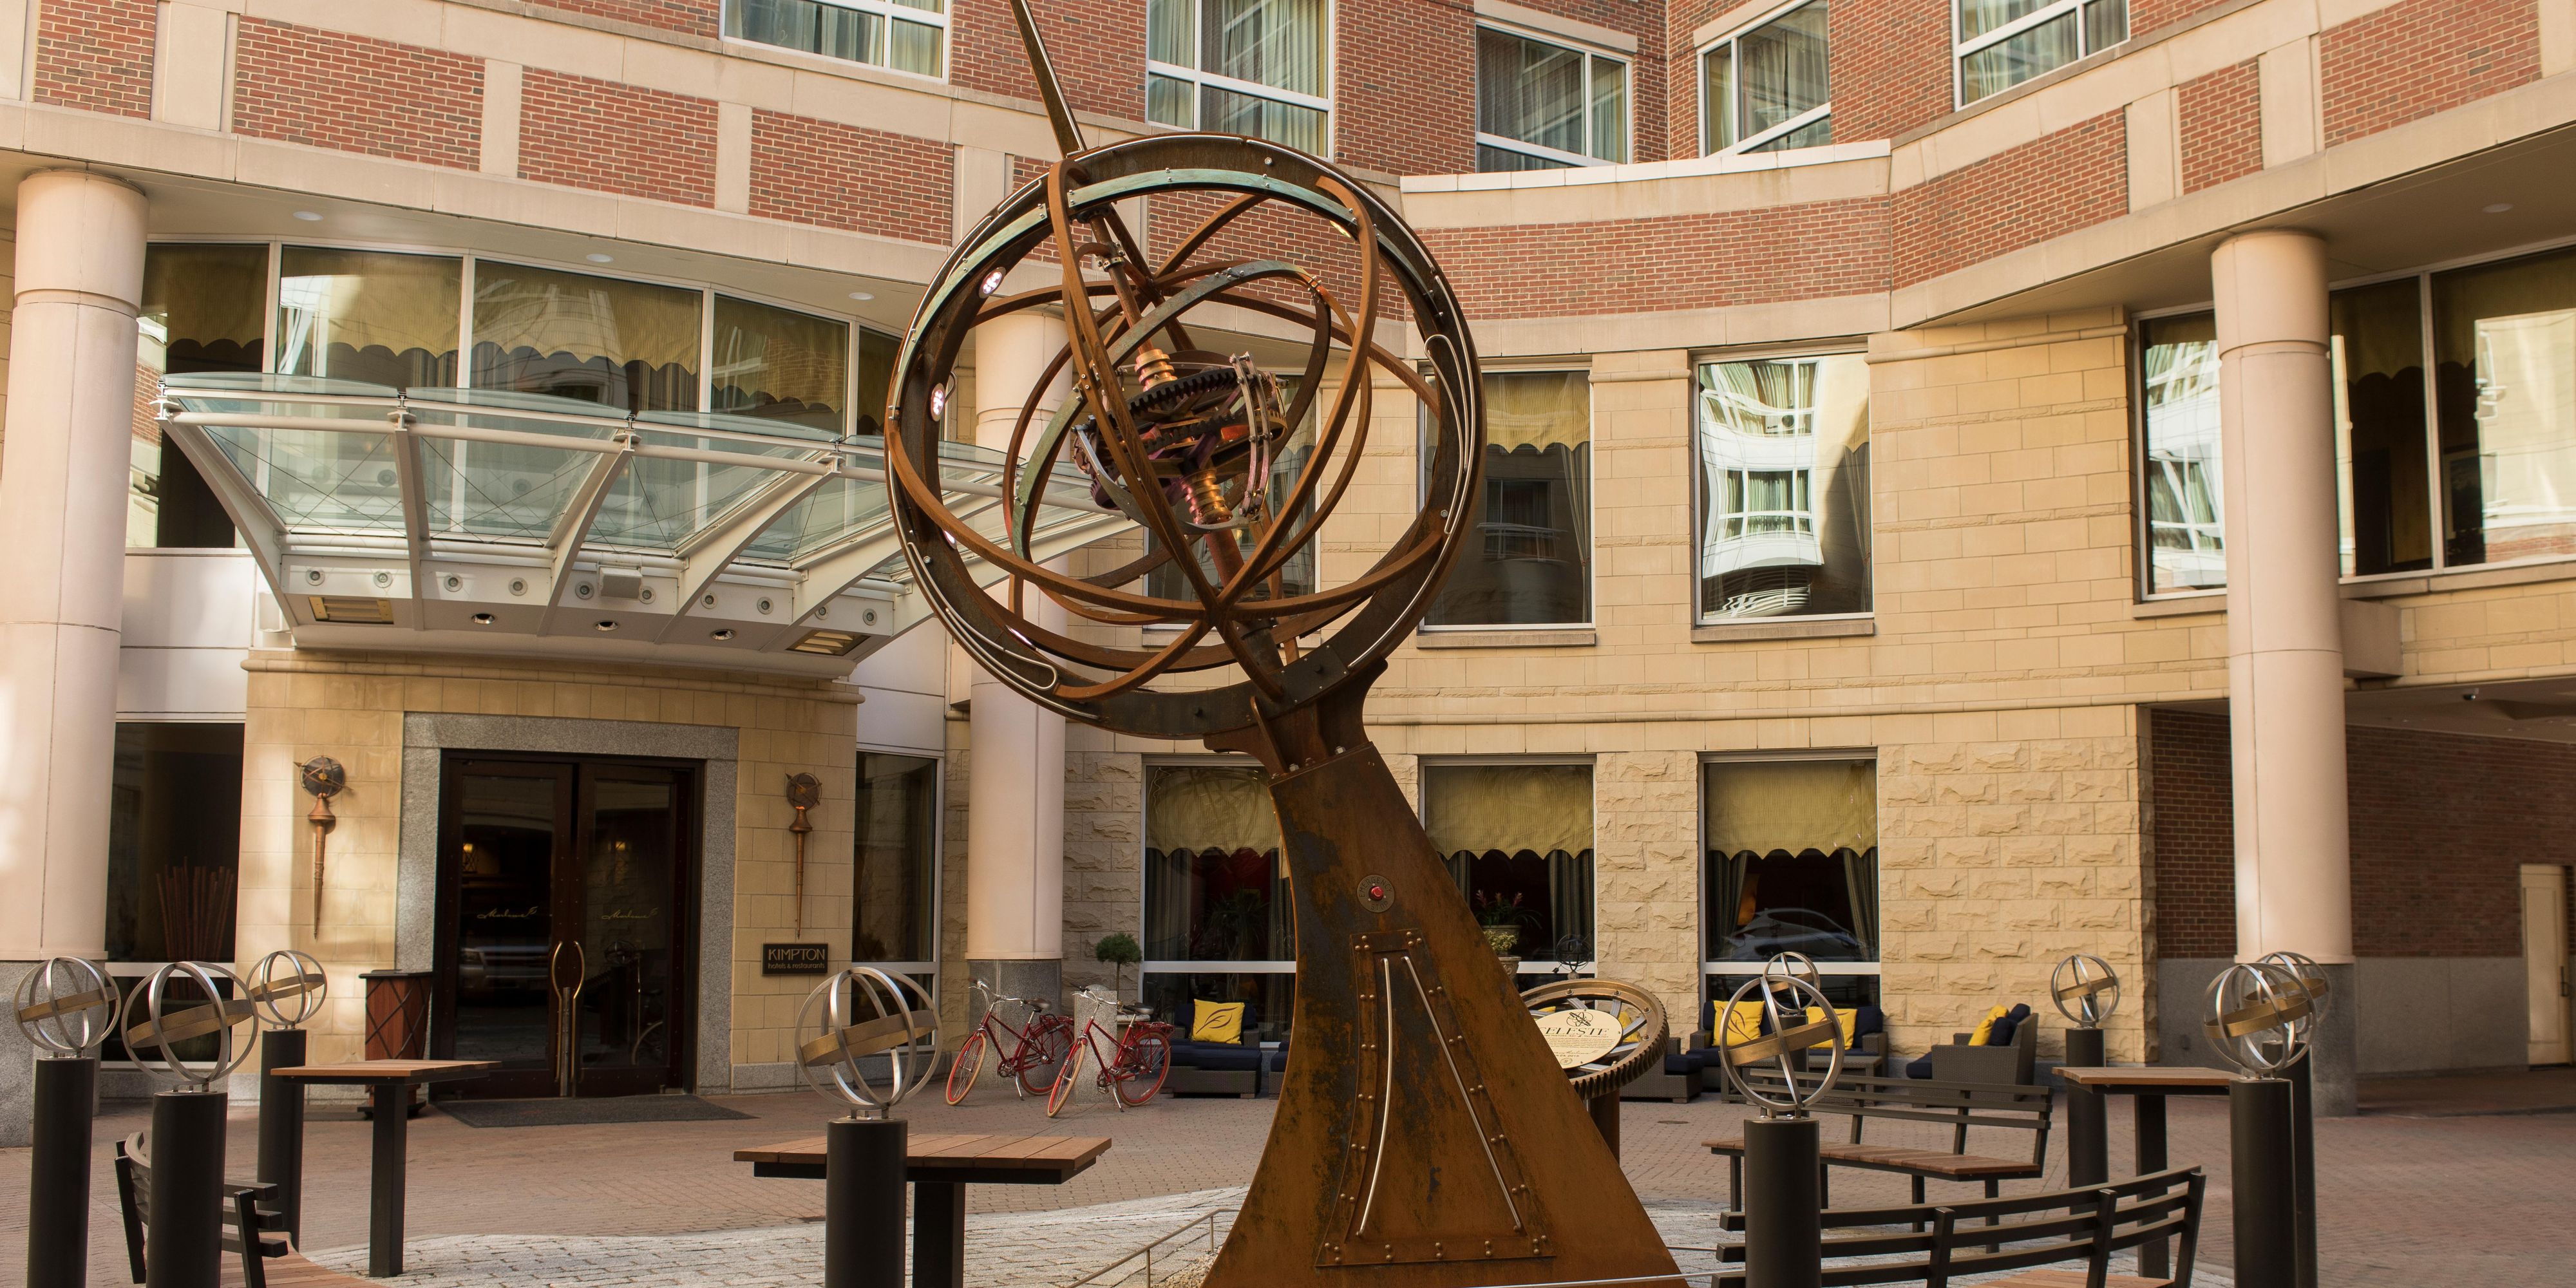 Guests enter our hotel via an enchanting courtyard, where they’re greeted by Celeste, a 25-foot-tall artistic interpretation of an armillary that perfectly speaks to Cambridge's sense of discovery and innovation. Grab a bench on which to ponder this interactive celestial sculpture - we host private events in this inspiring space, too.